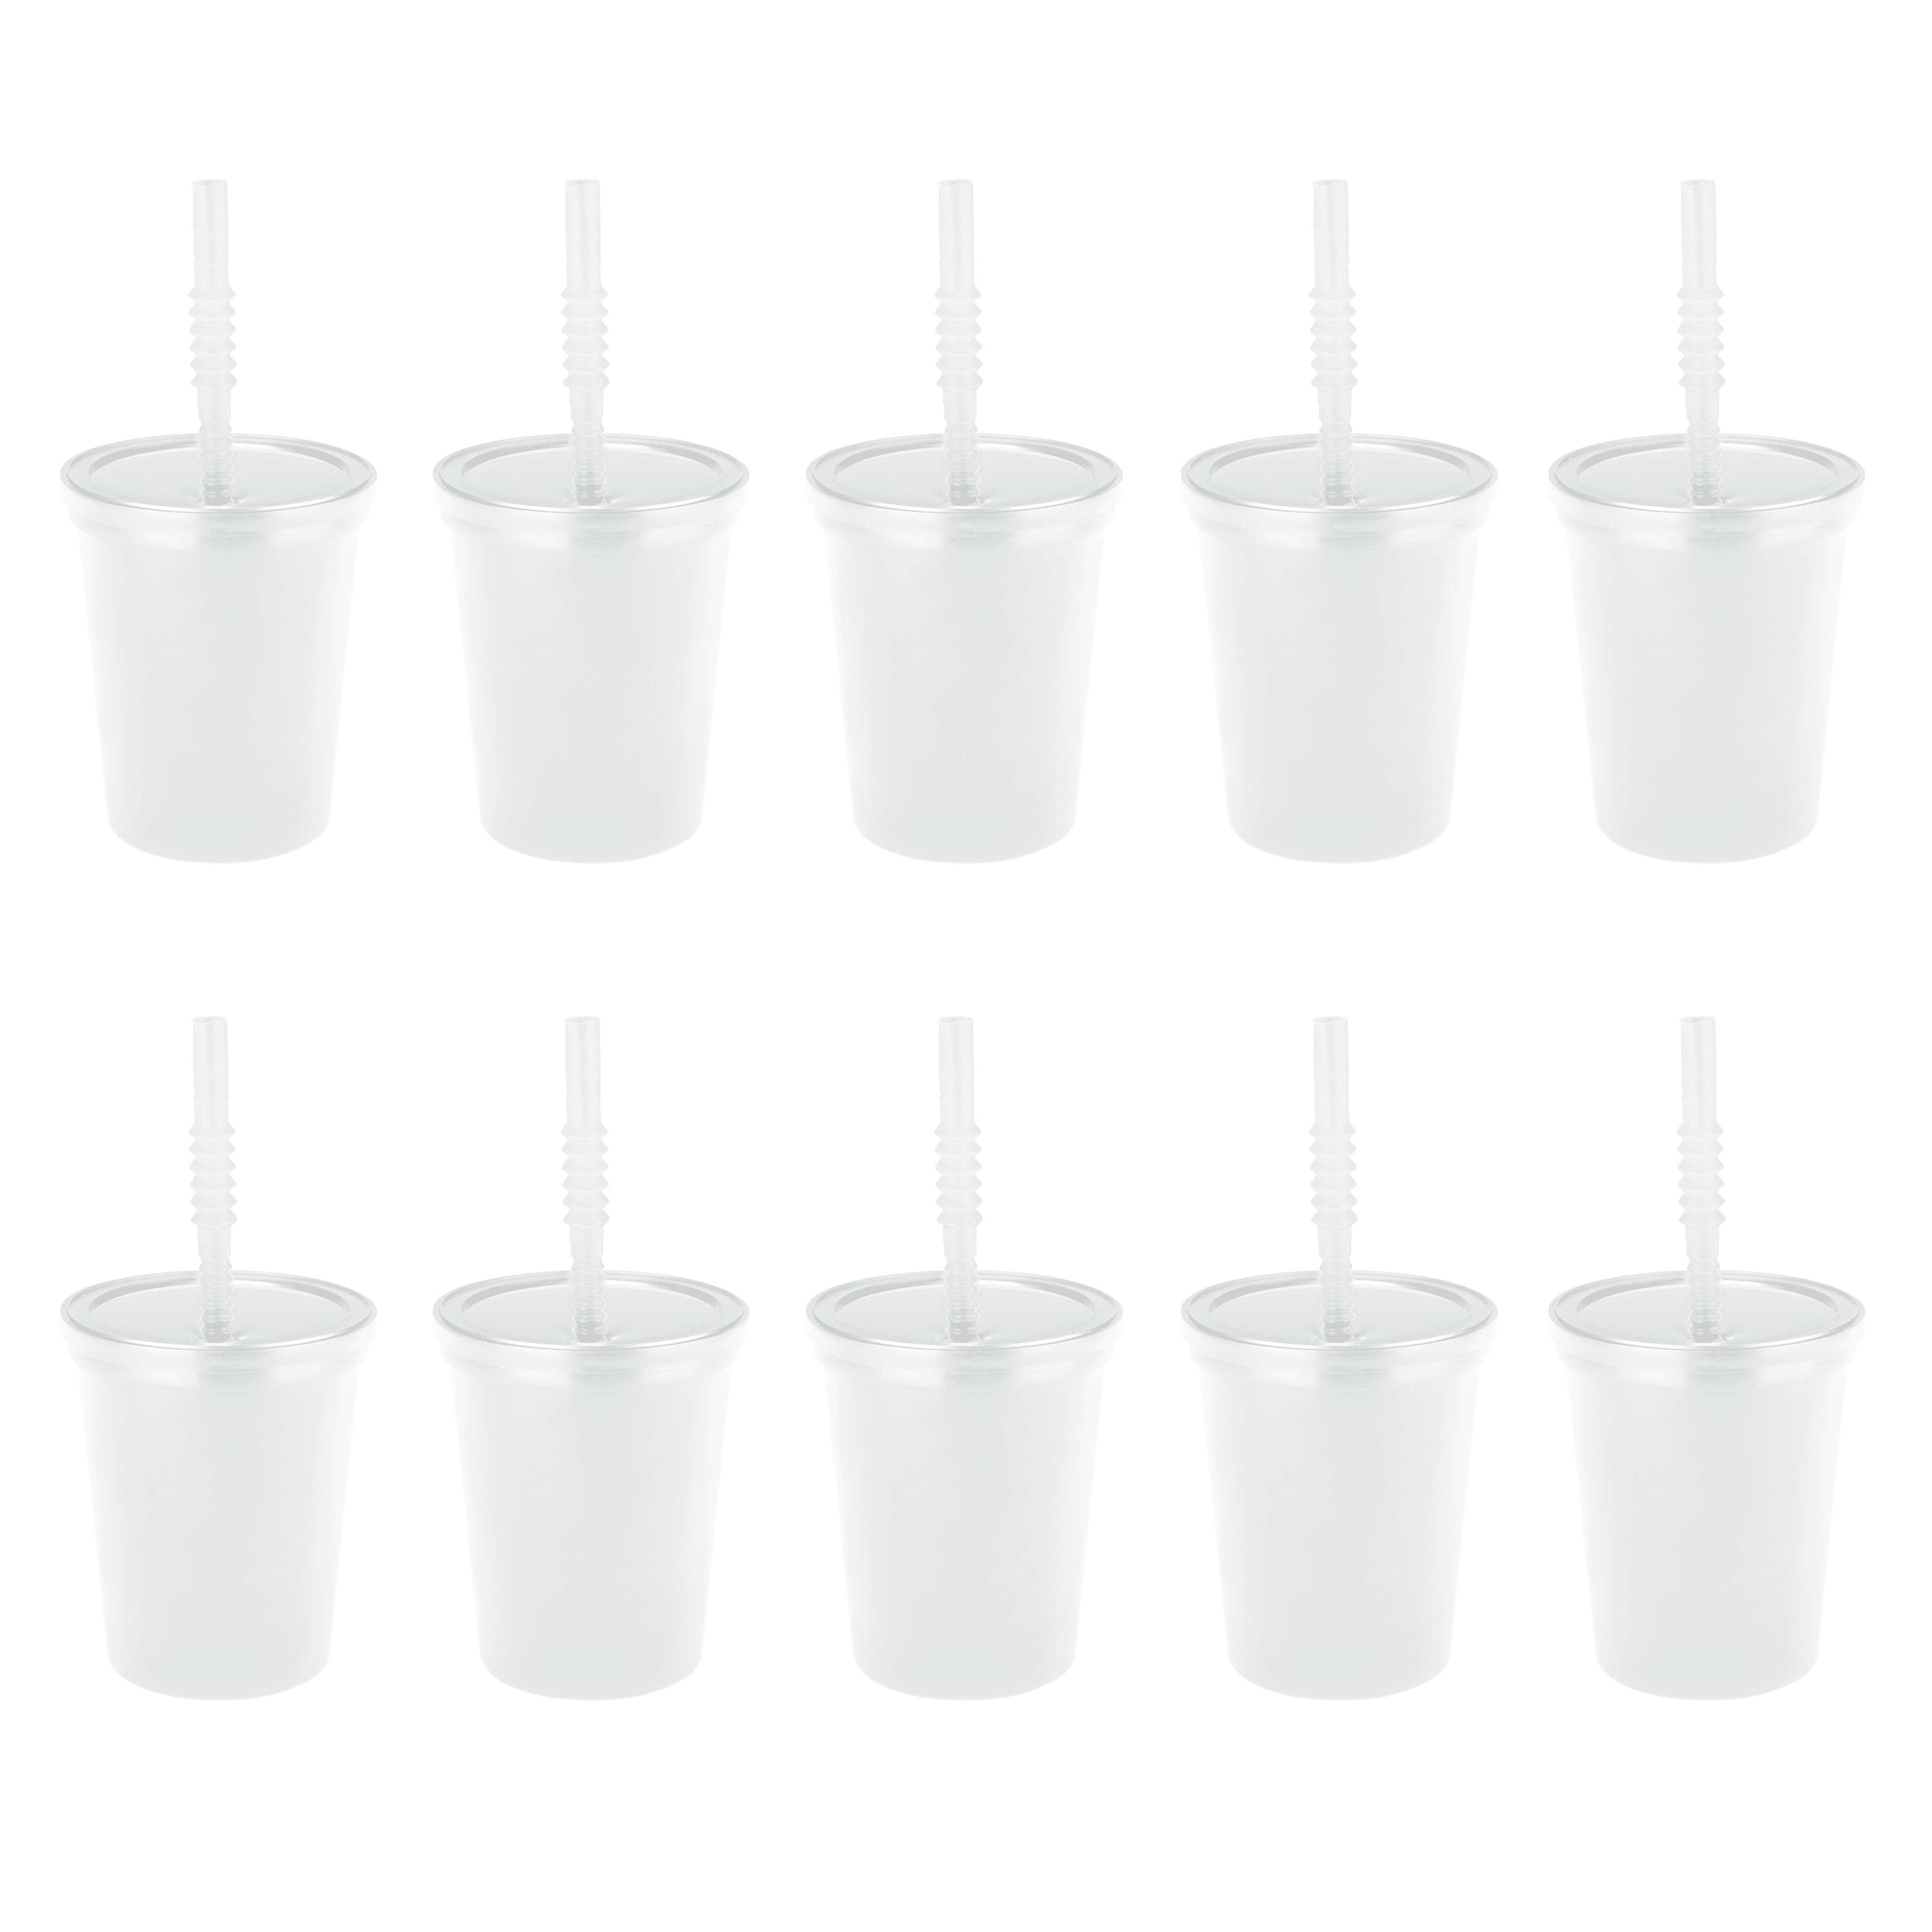 BLANK Tumbler with Straw -Skinny Tumblers (12 Pack) 16 Oz. Matte Pastel  Colored Acrylic Tumblers with Lids and Straws - Vinyl DIY Gifts